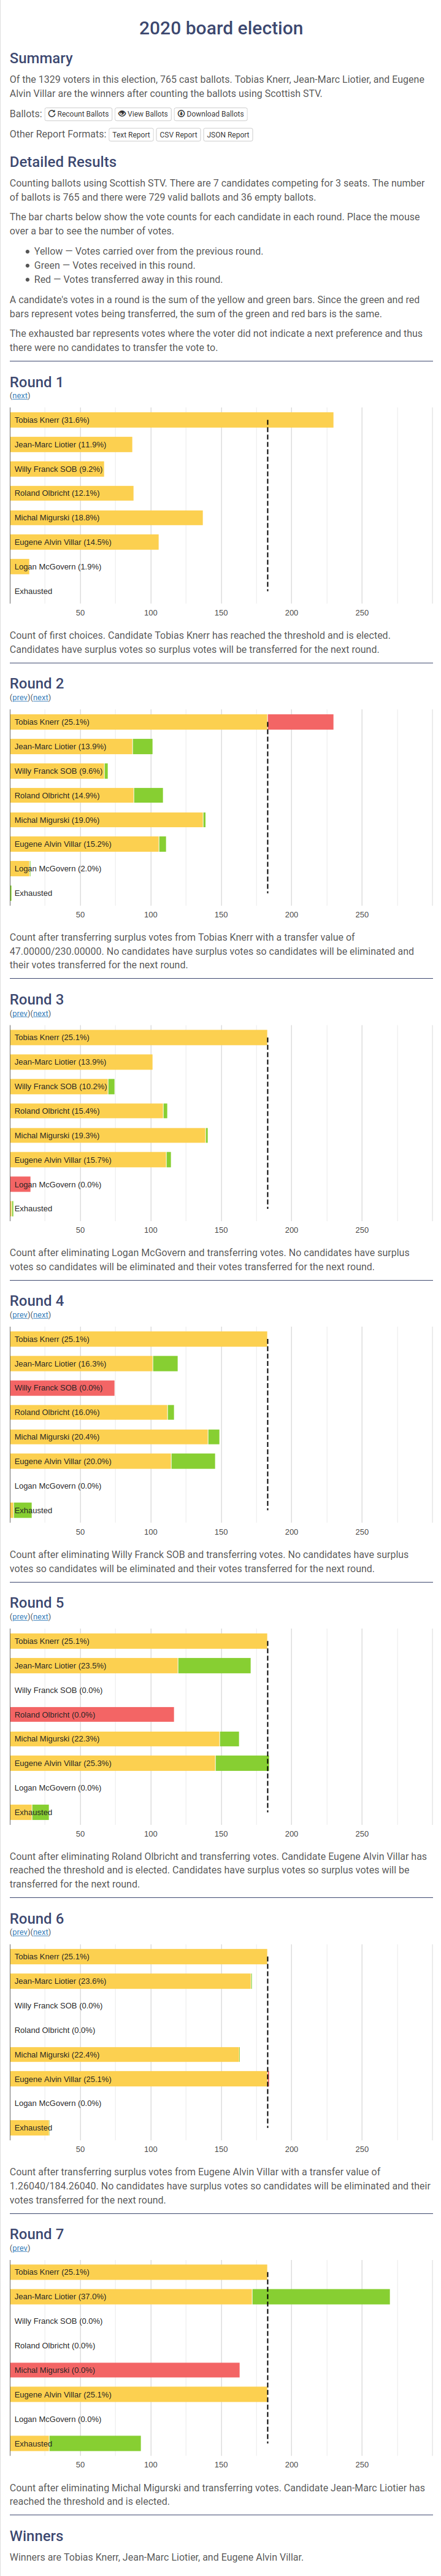 AGM2020 osmf-board-election-results-opavote.png